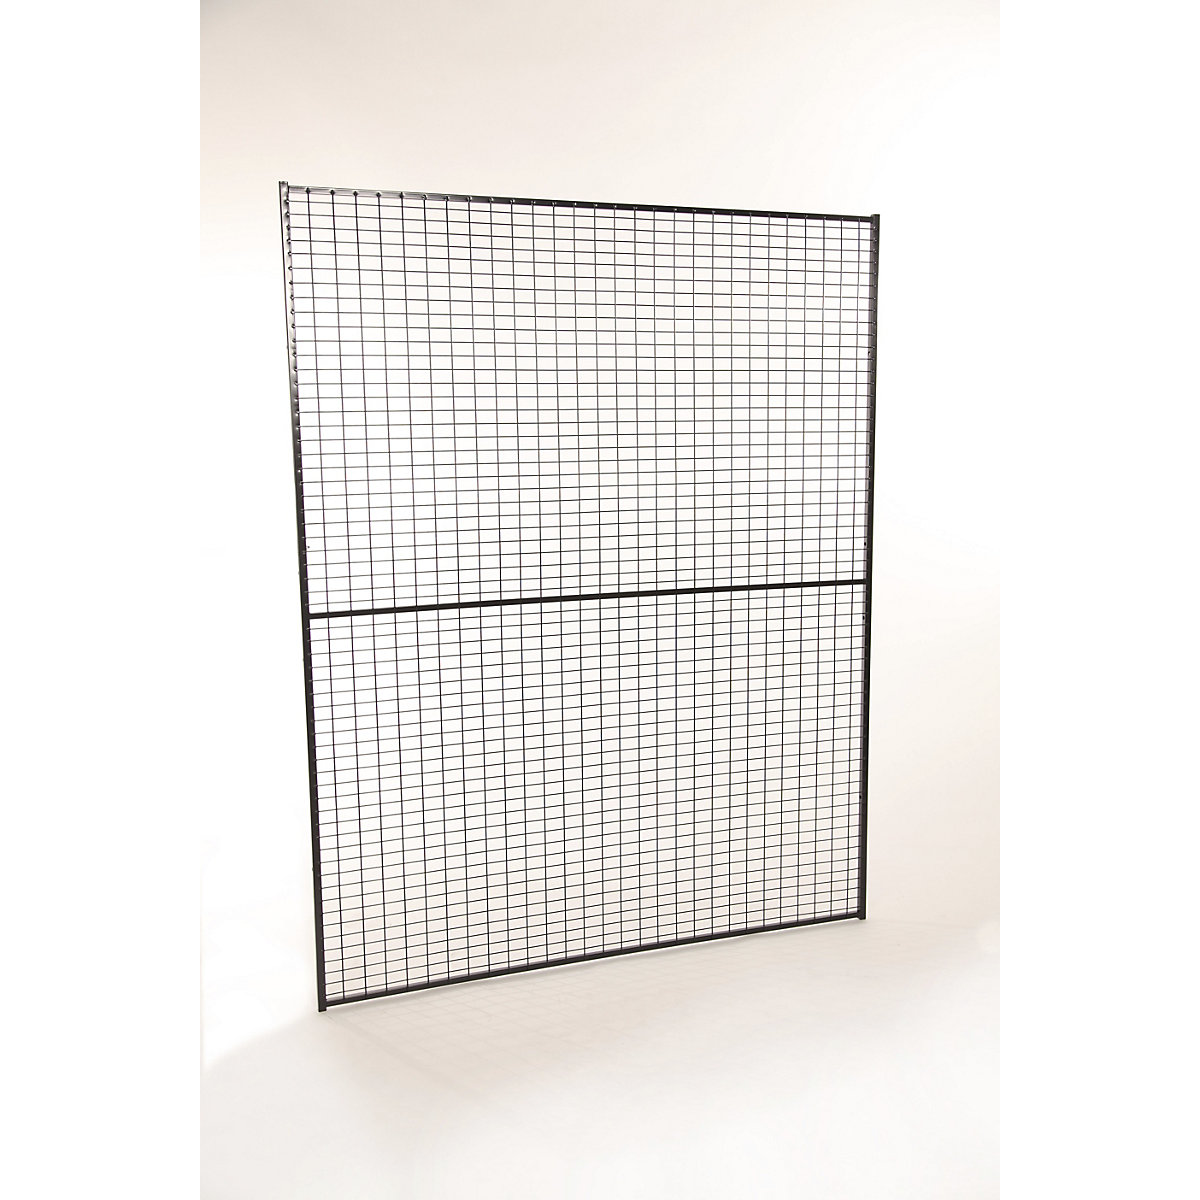 X-GUARD LITE machine protective fencing, wall section – Axelent, height 1900 mm, width 1300 mm-3